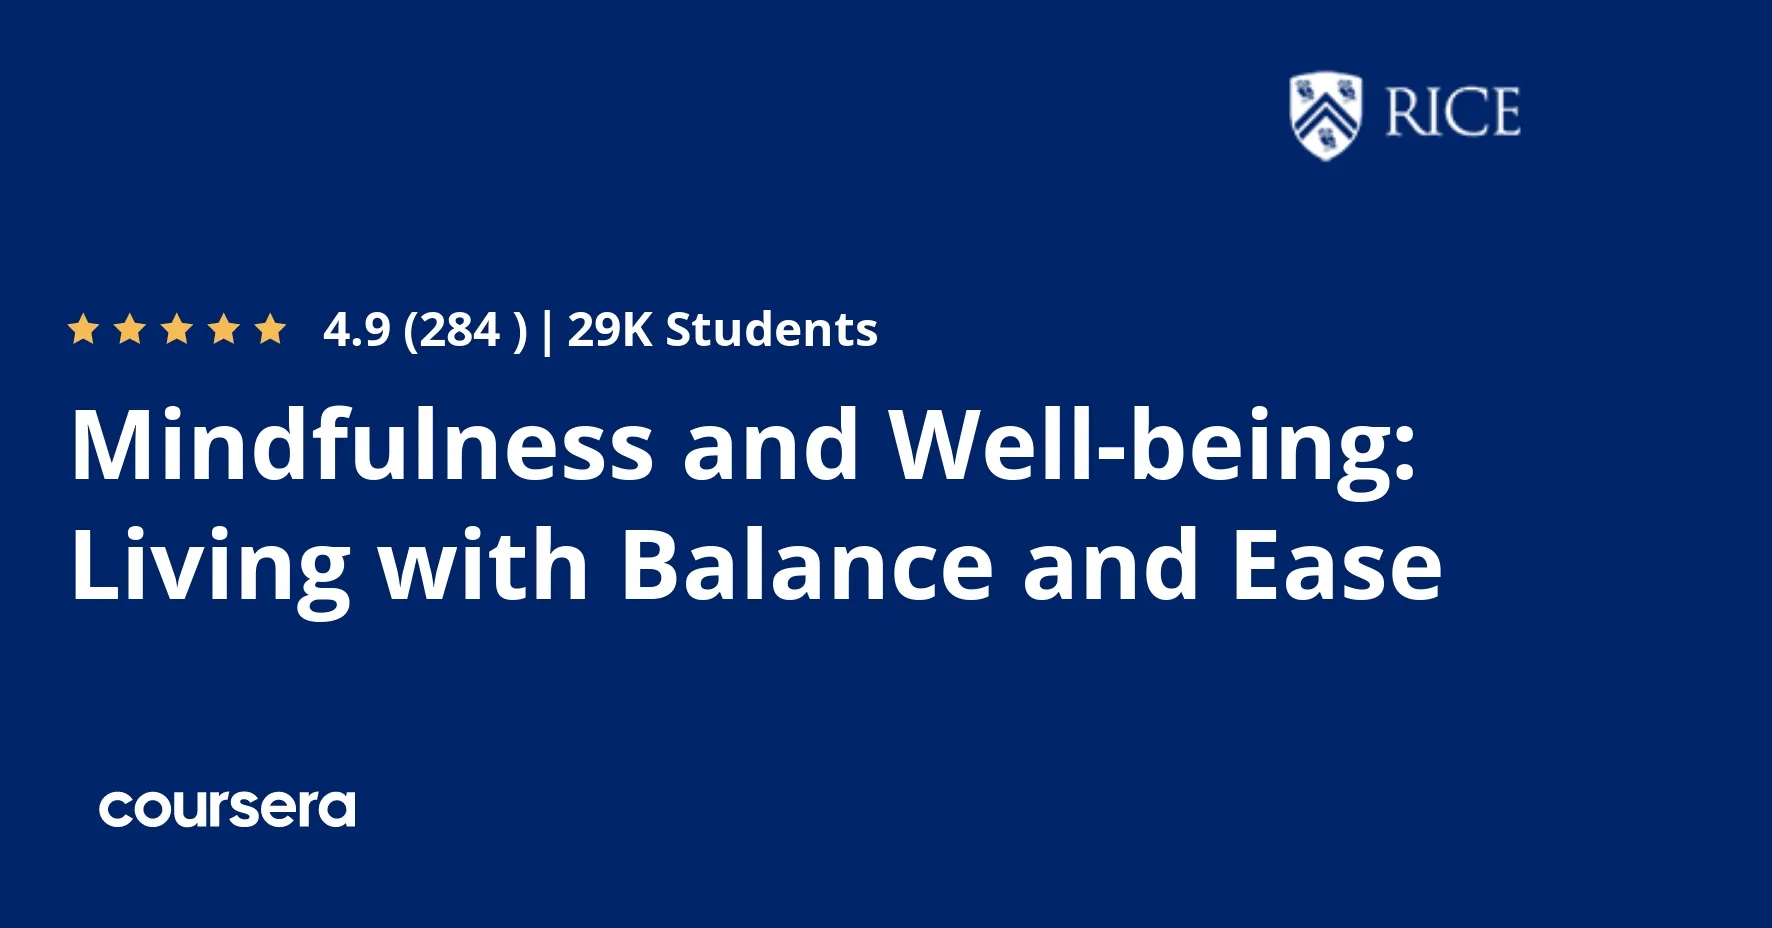 Mindfulness and Well-being: Living with Balance and Ease